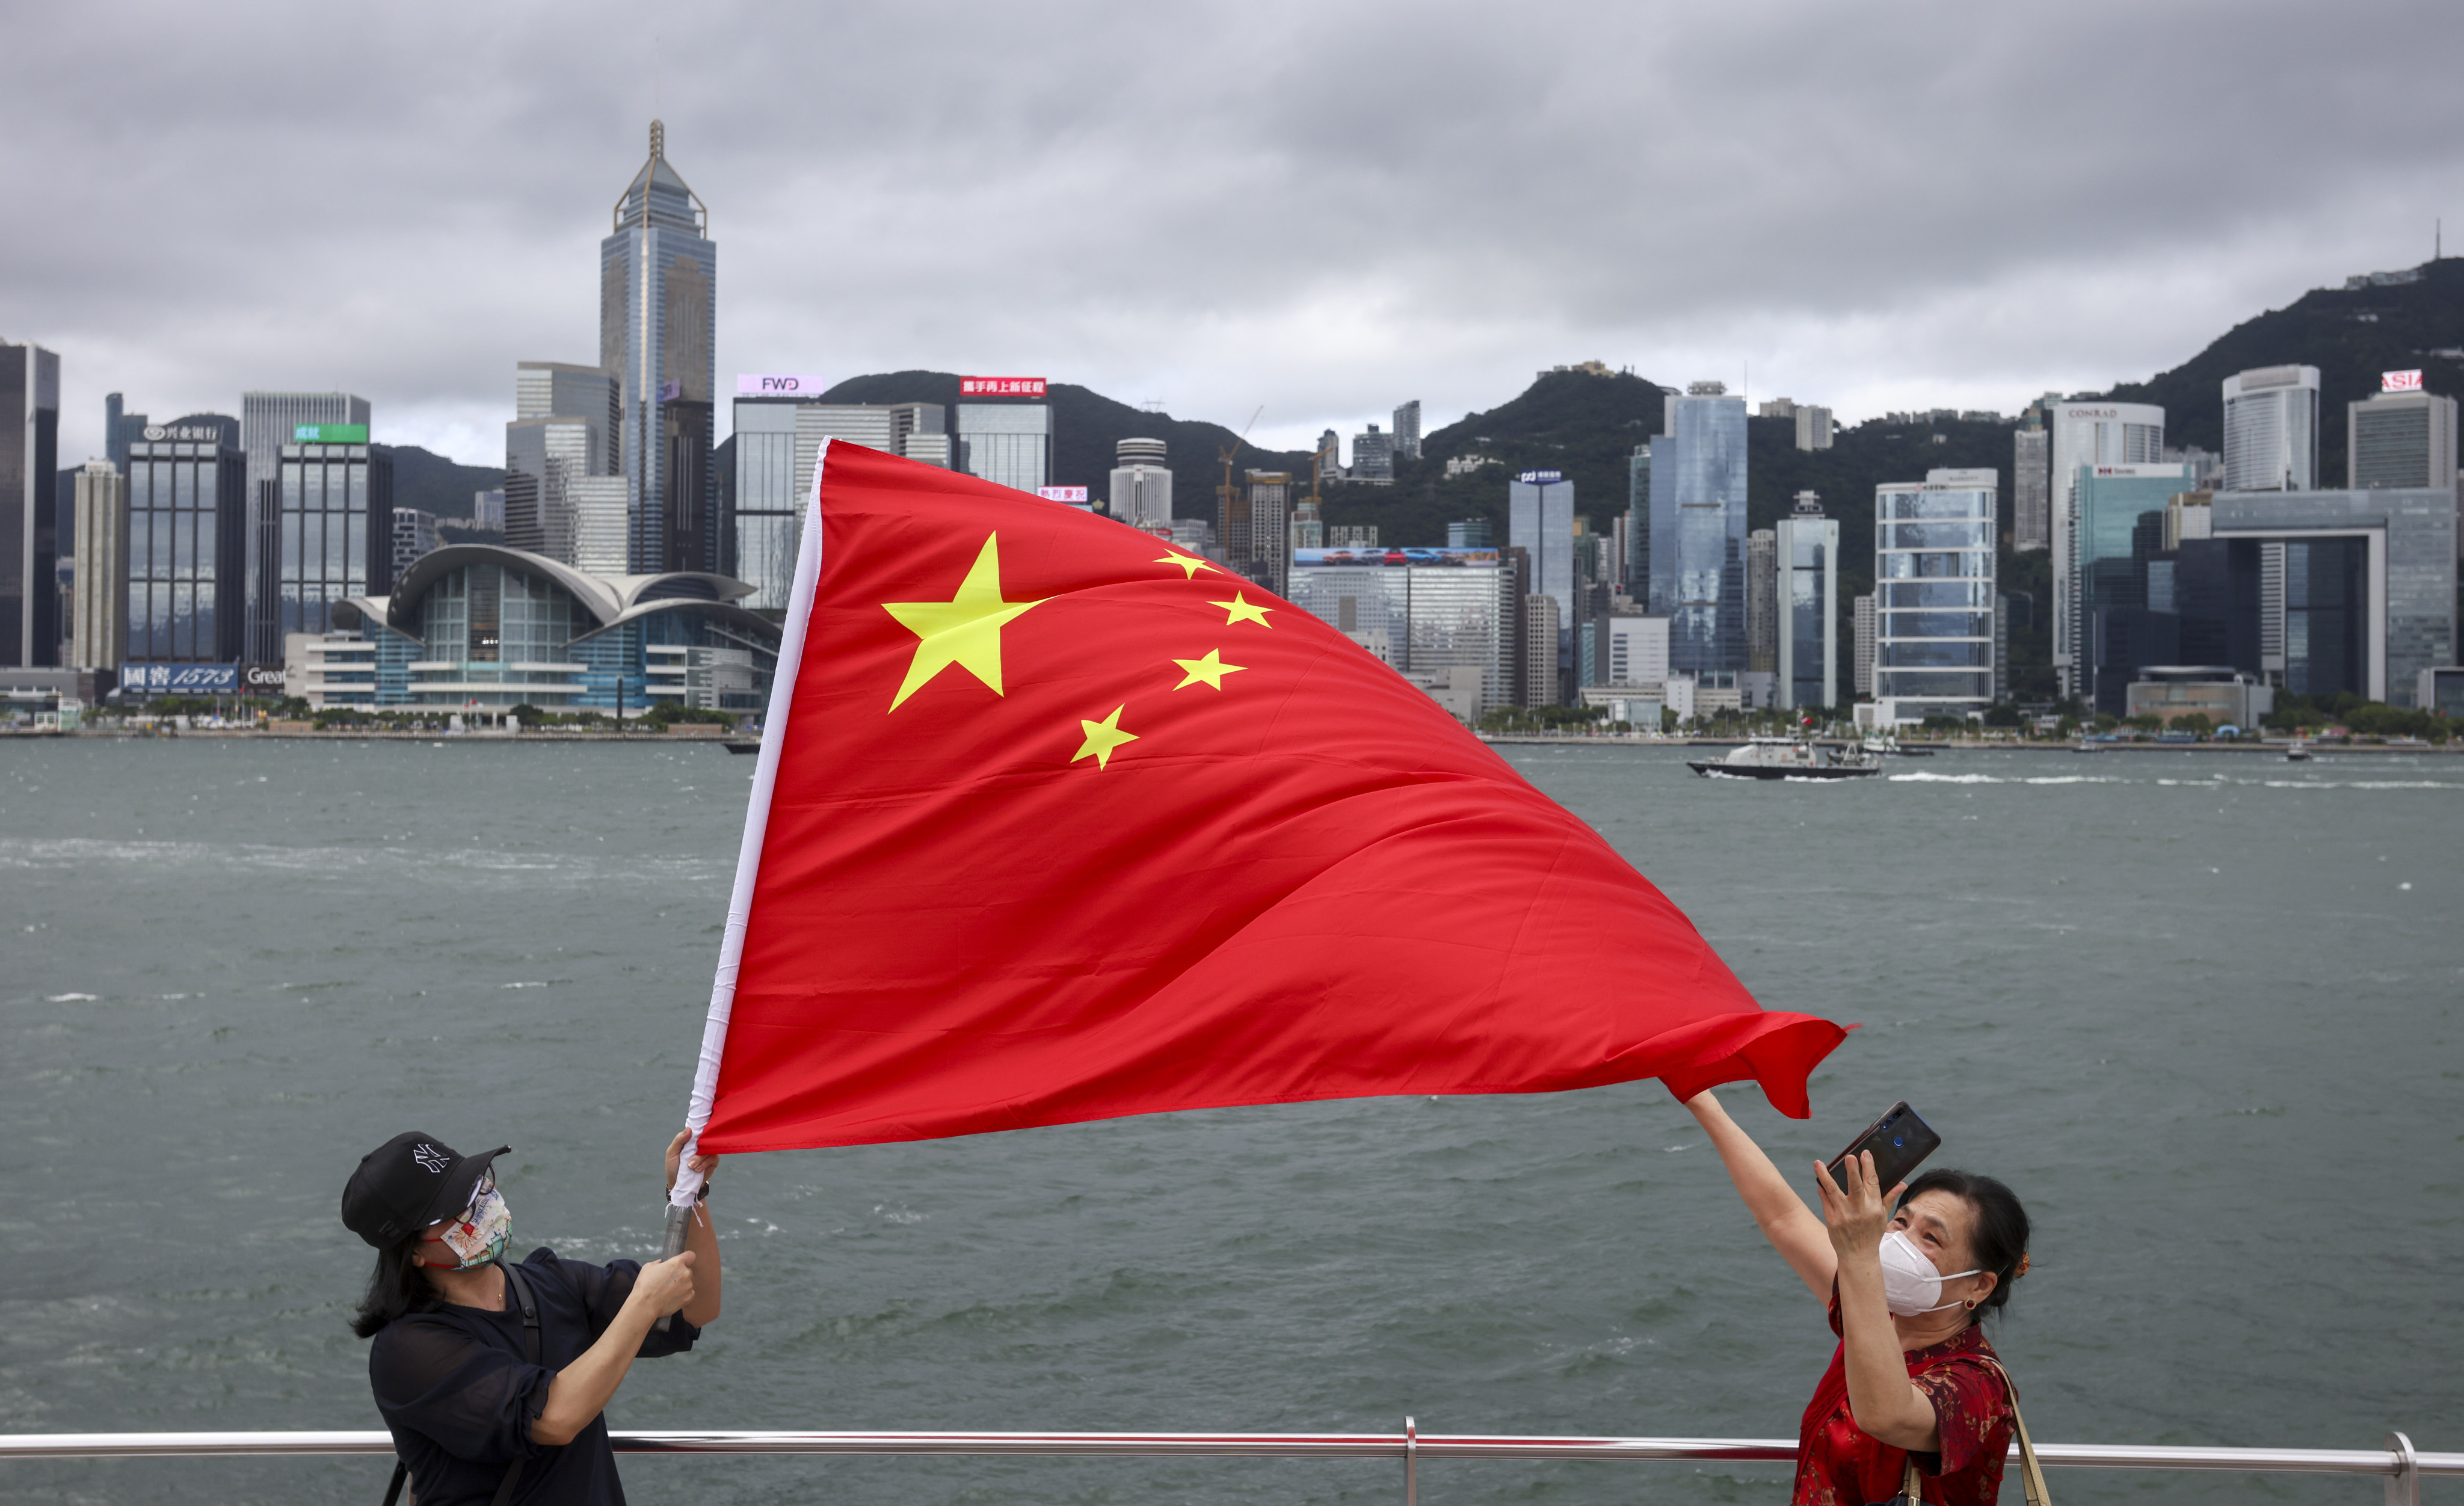 Residents celebrate the 25th anniversary of Hong Kong’s return to Chinese rule last year by waving the national flag at the Tsim Sha Tsui waterfront. Photo: Nora Tam